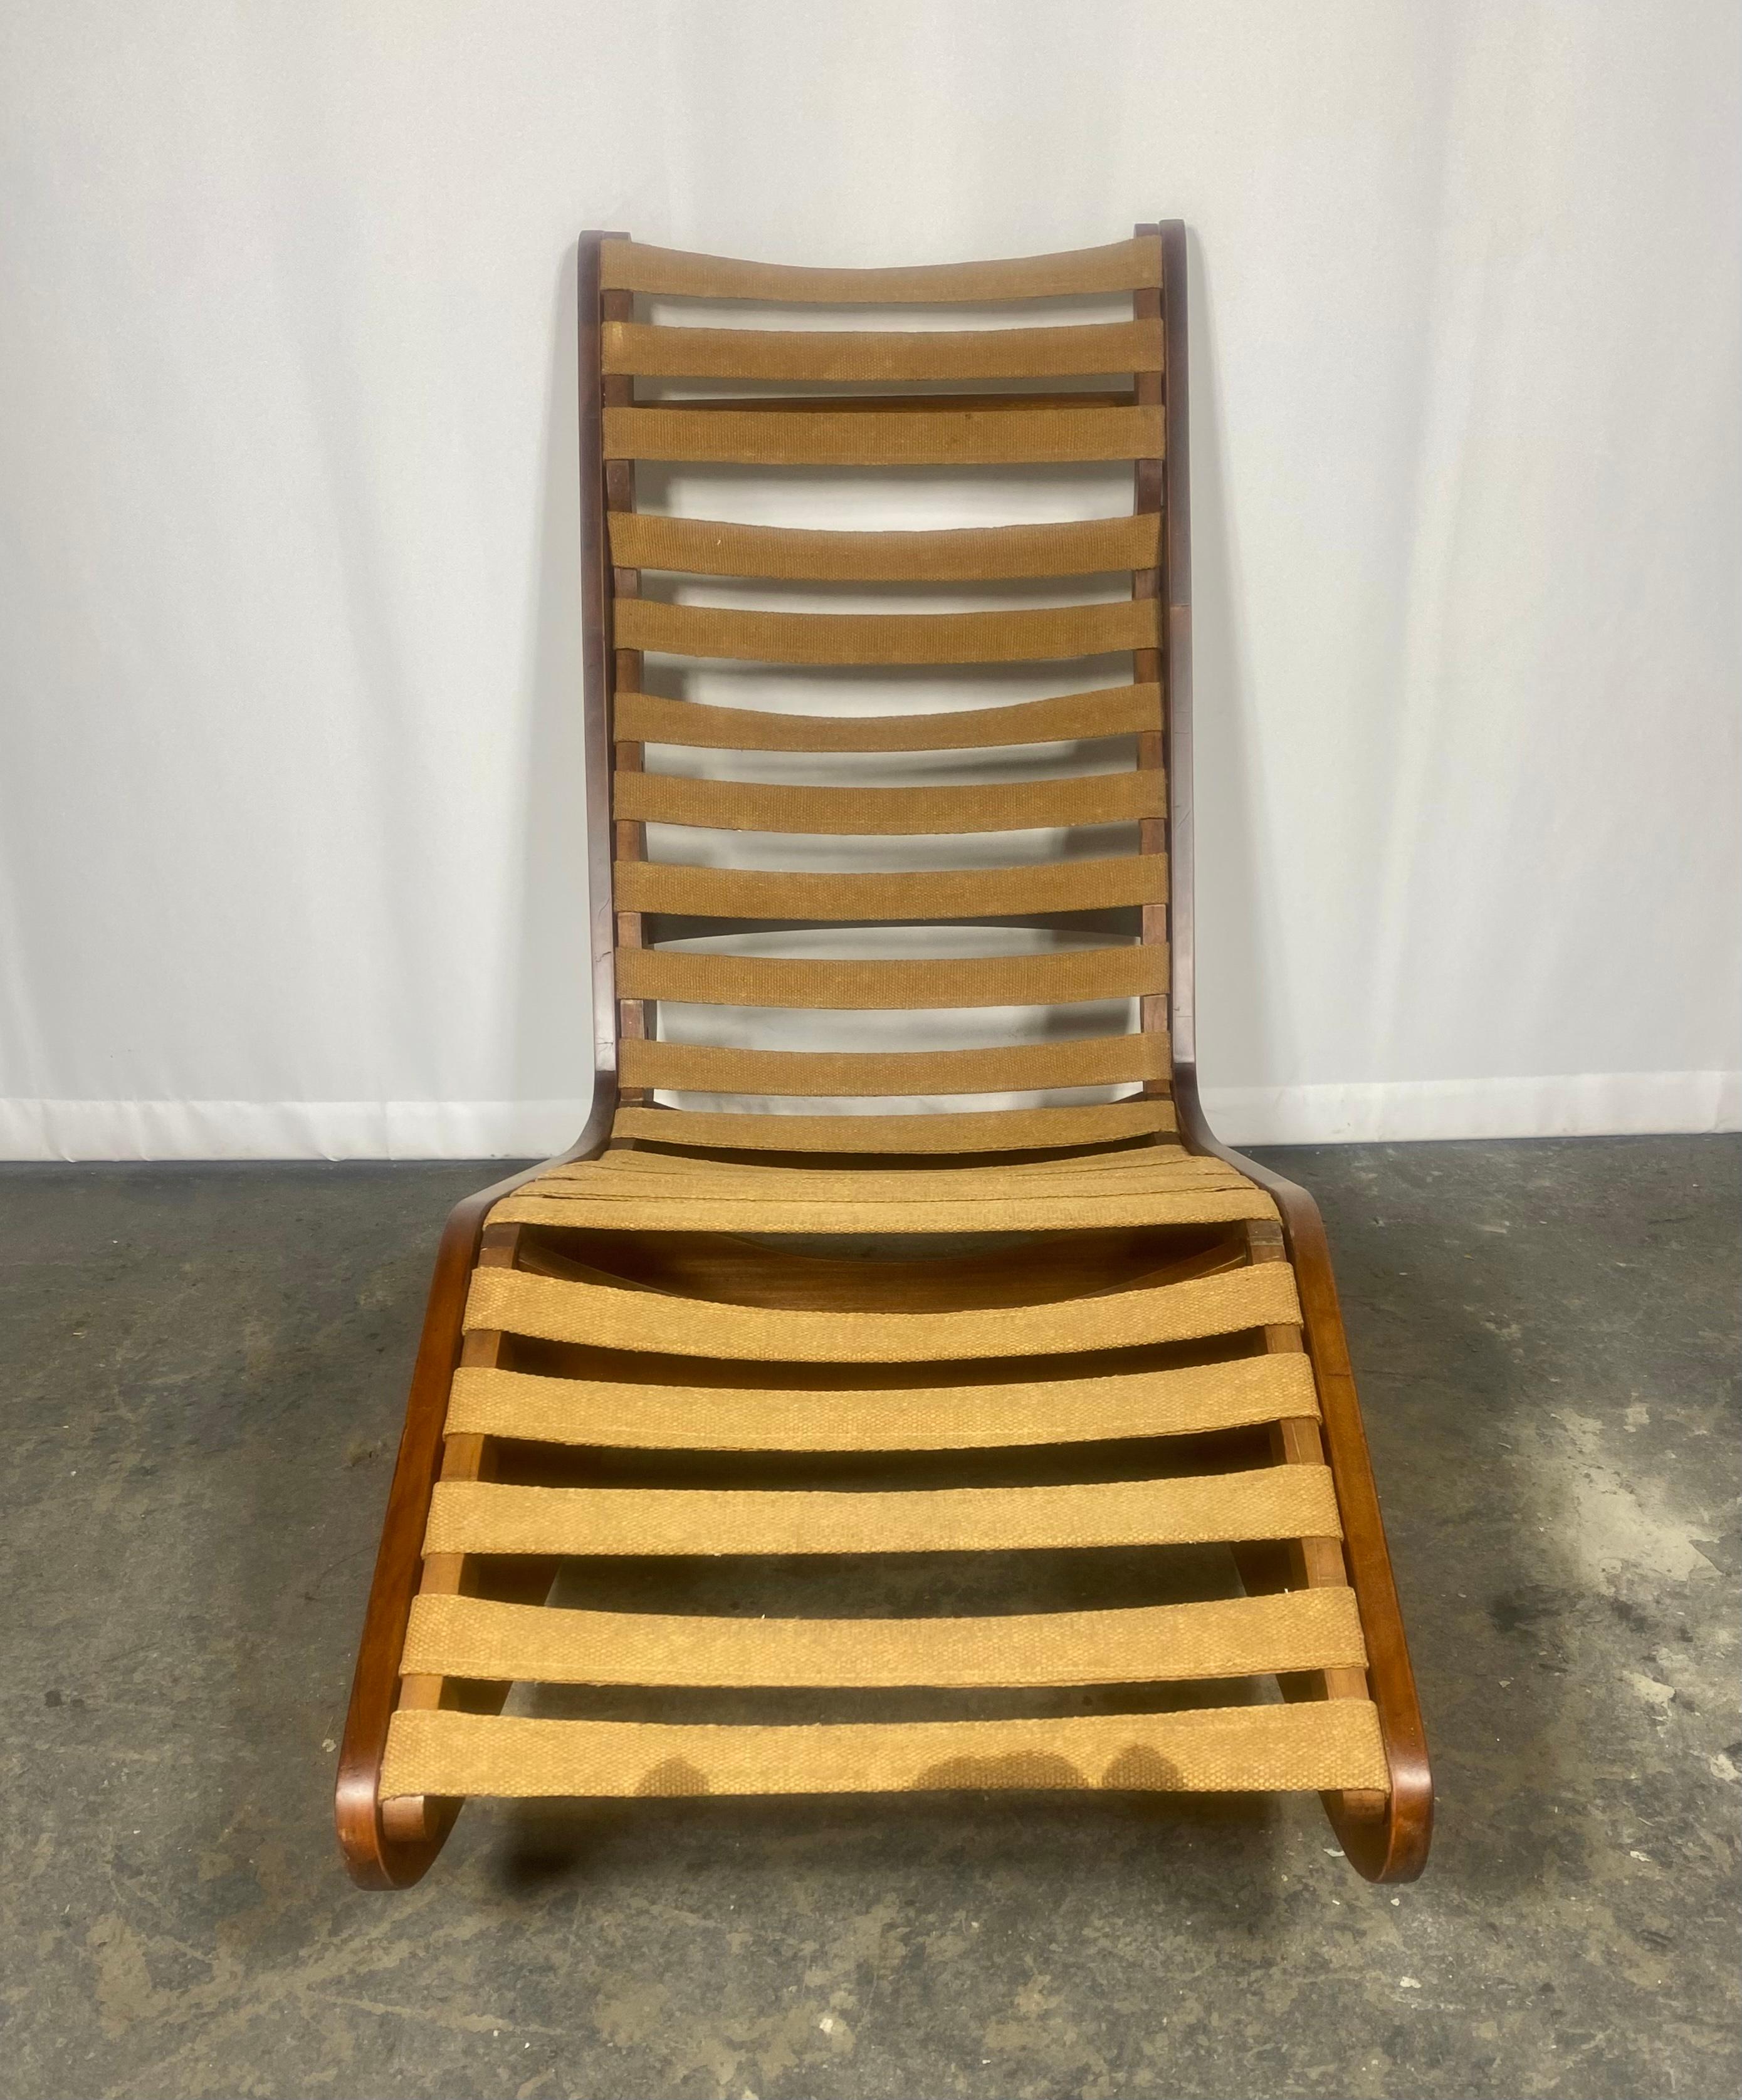 Unusual Modernist interior/ exterior rocking chaise lounge, atrb. to Klaus Grabe, Wood frame recently refinished.. retains original strapping,, aMAZING DESIGN, Extremely comfortable, Perfect piece for garden, porch, deck, patio, reading nook. Hand